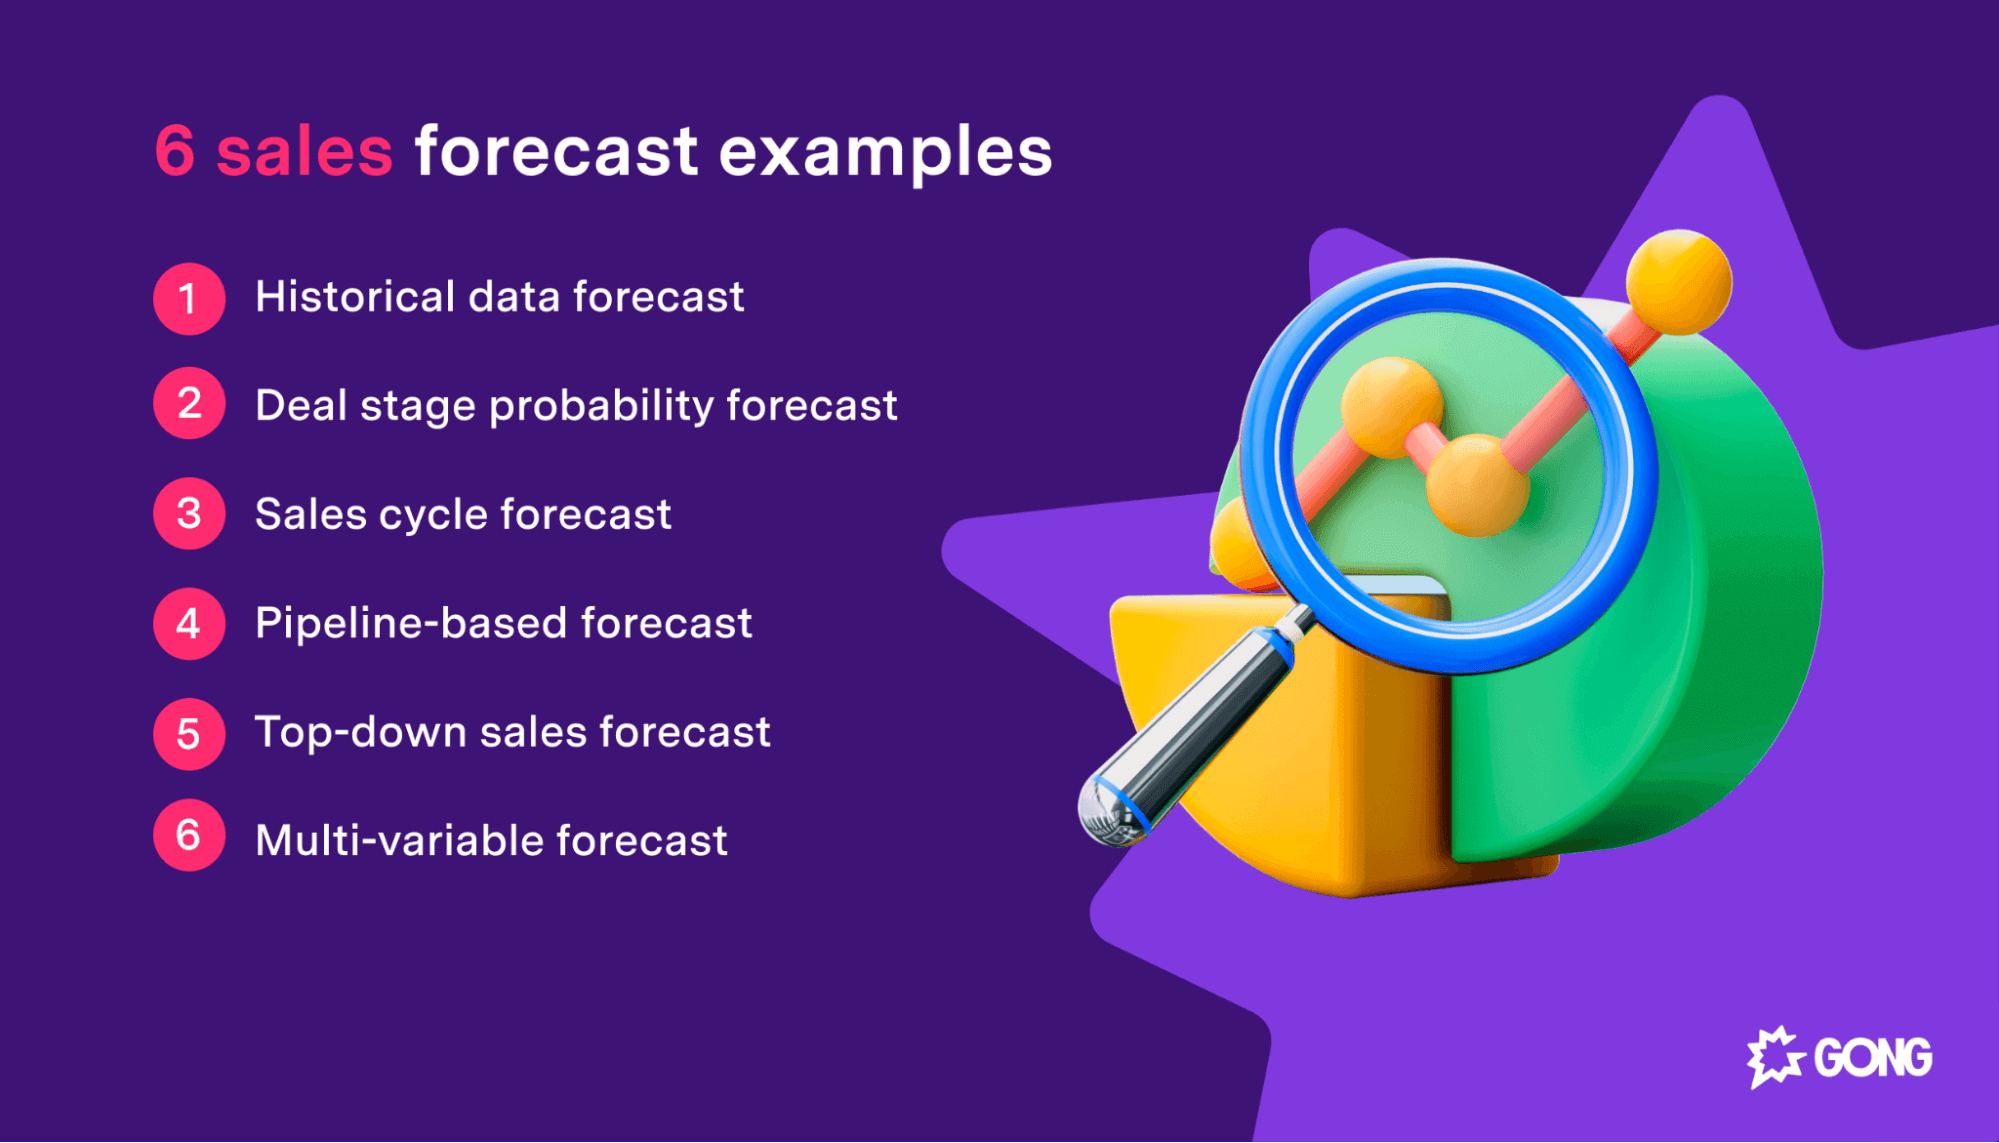 6 sales forecast examples